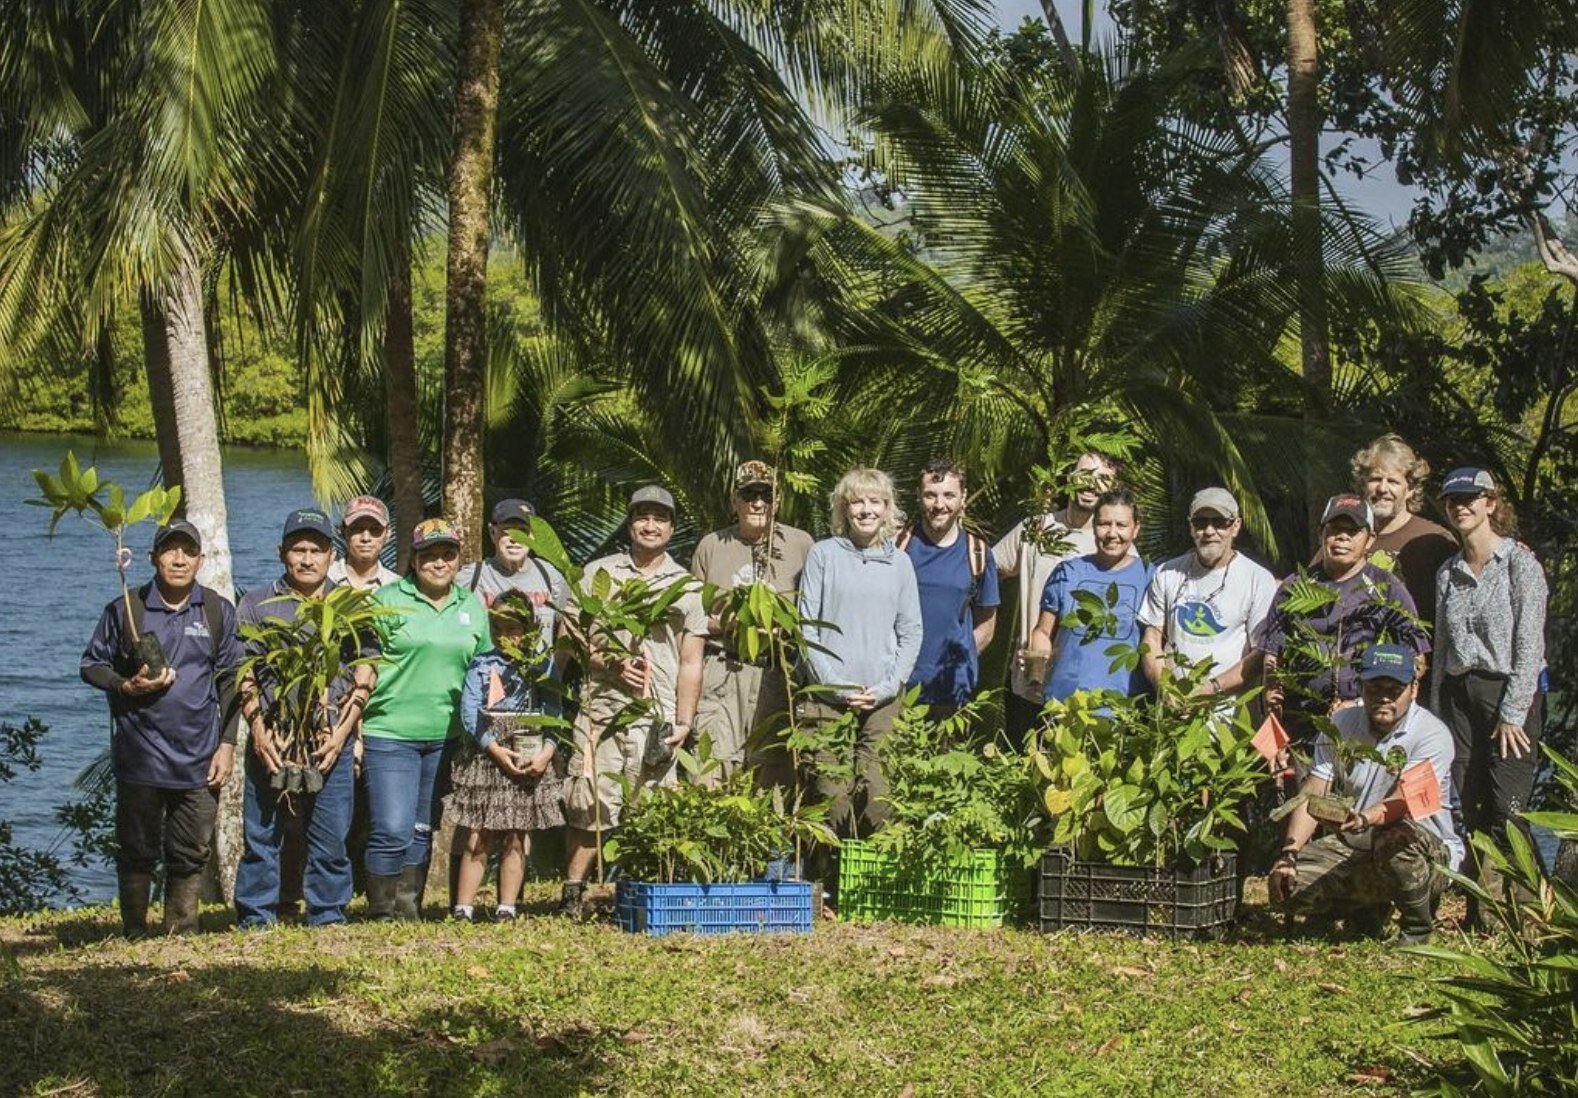 PARTNER RECOGNITION: INSTITUTE FOR TROPICAL ECOLOGY (ITEC PANAMA) @itecpanama 
With its recent achievement of over 10,500 Almendro trees planted over the Bocas del Toro providence, Planet Rehab started to focus on the next step which involves the Gre